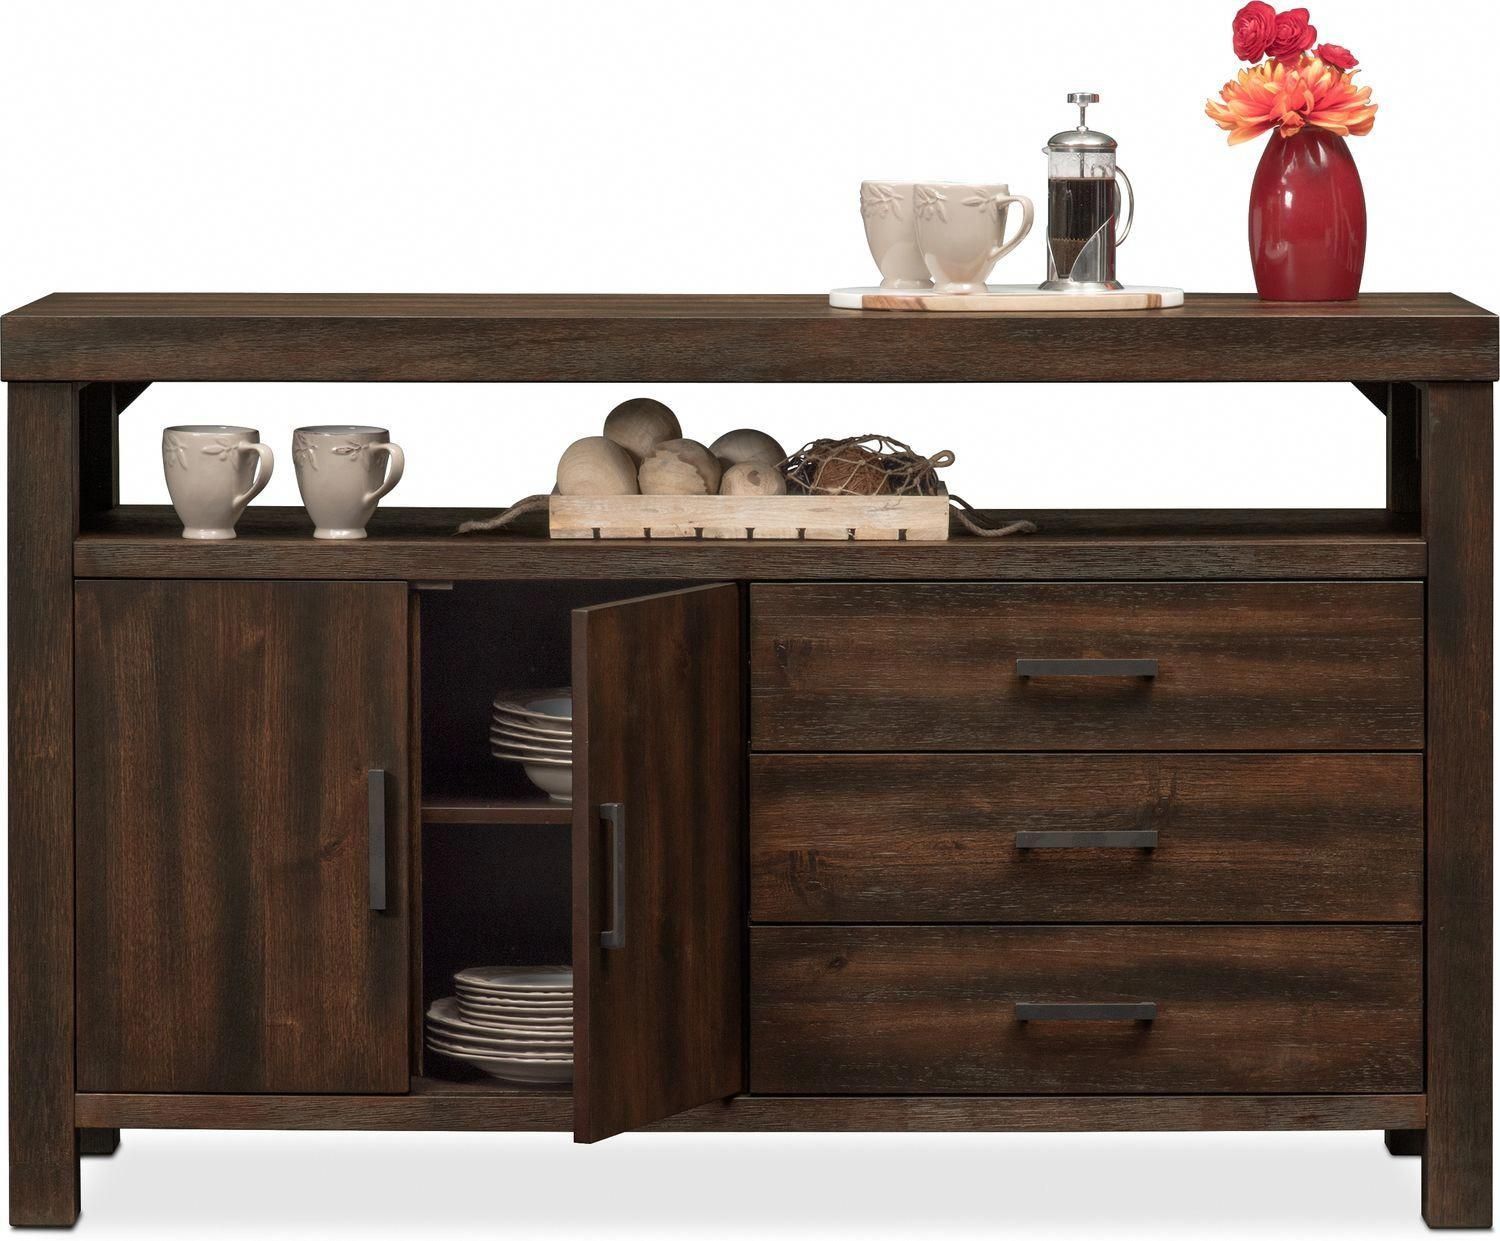 Tribeca Sideboard – Tobacco | Value City Furniture And Regarding Tribeca Sideboards (View 9 of 30)